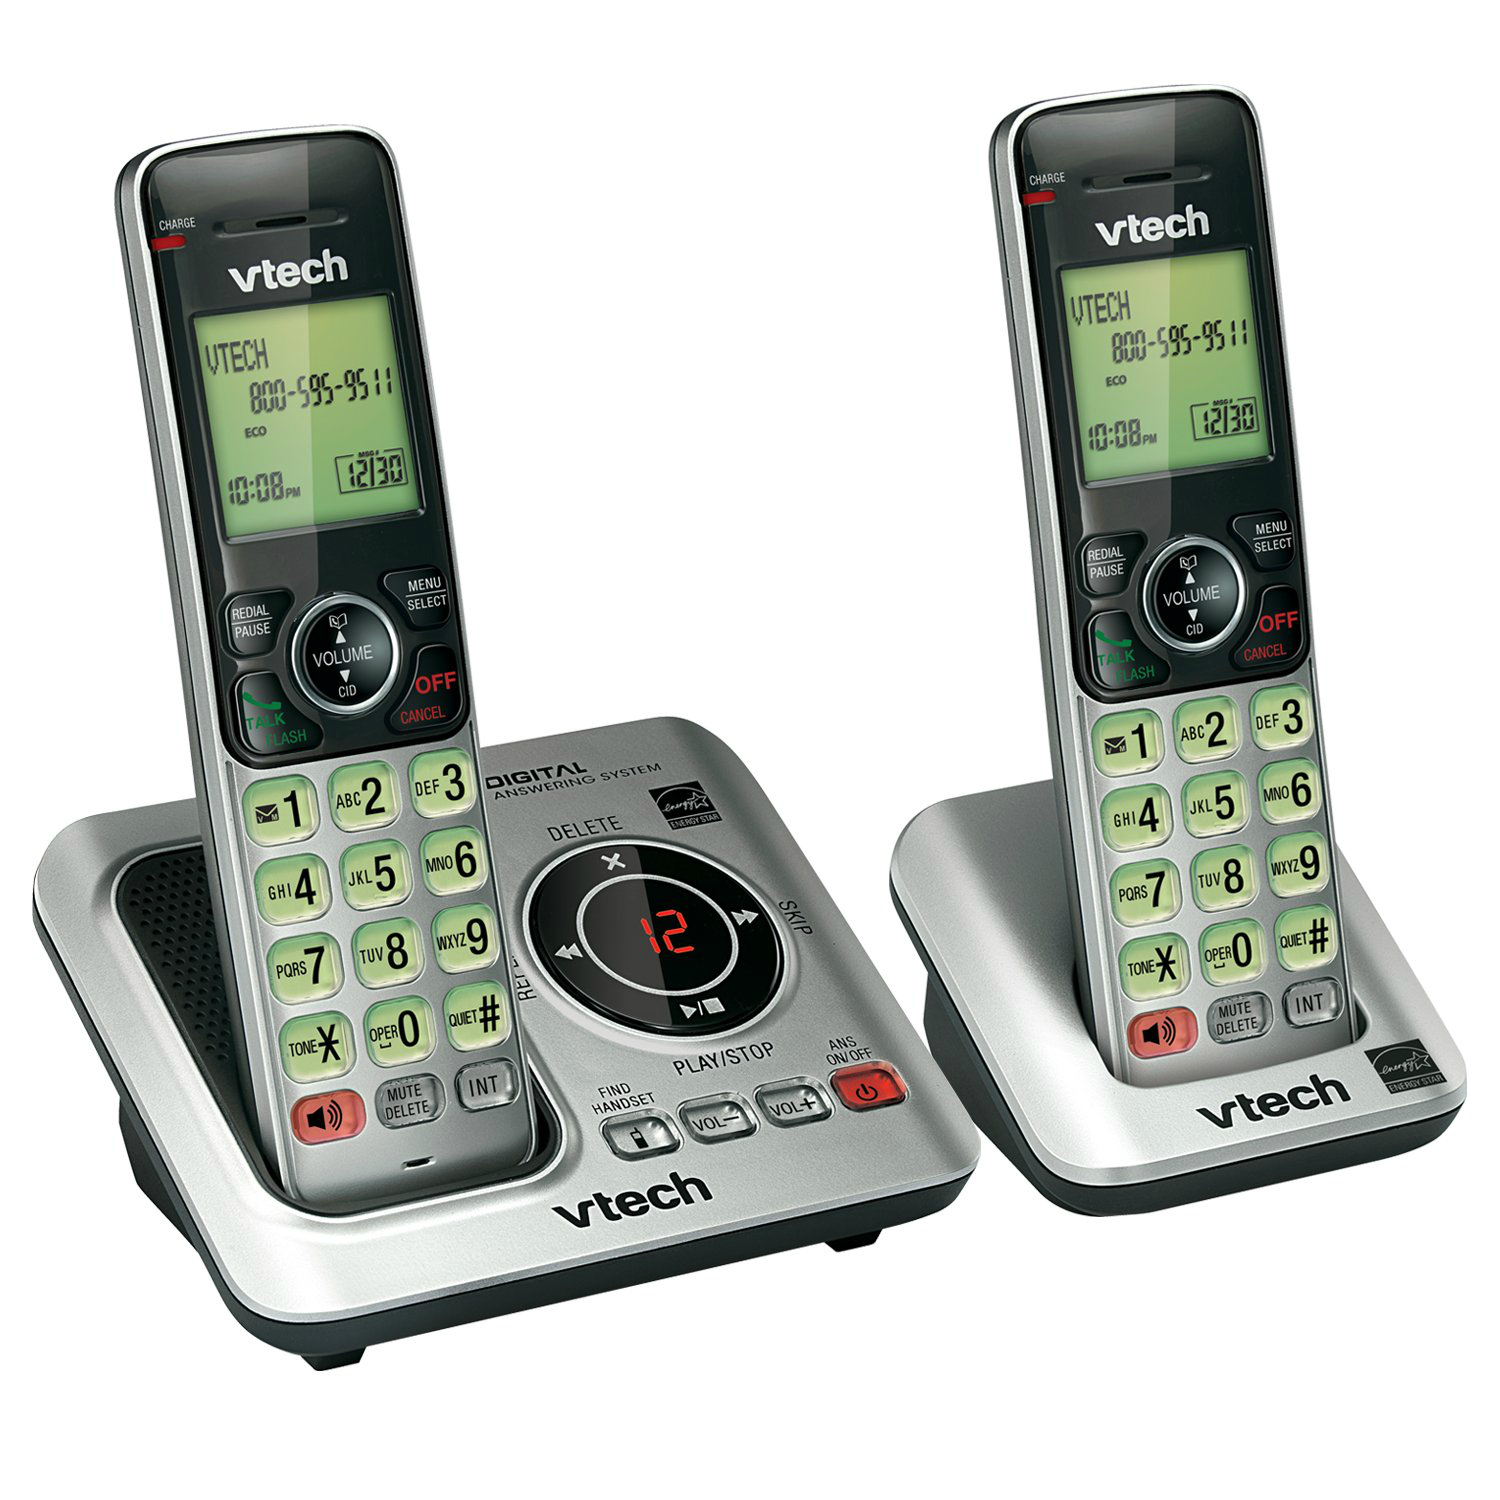 VTech CS6629-2 2 Handset Cordless Answering system - image 2 of 4